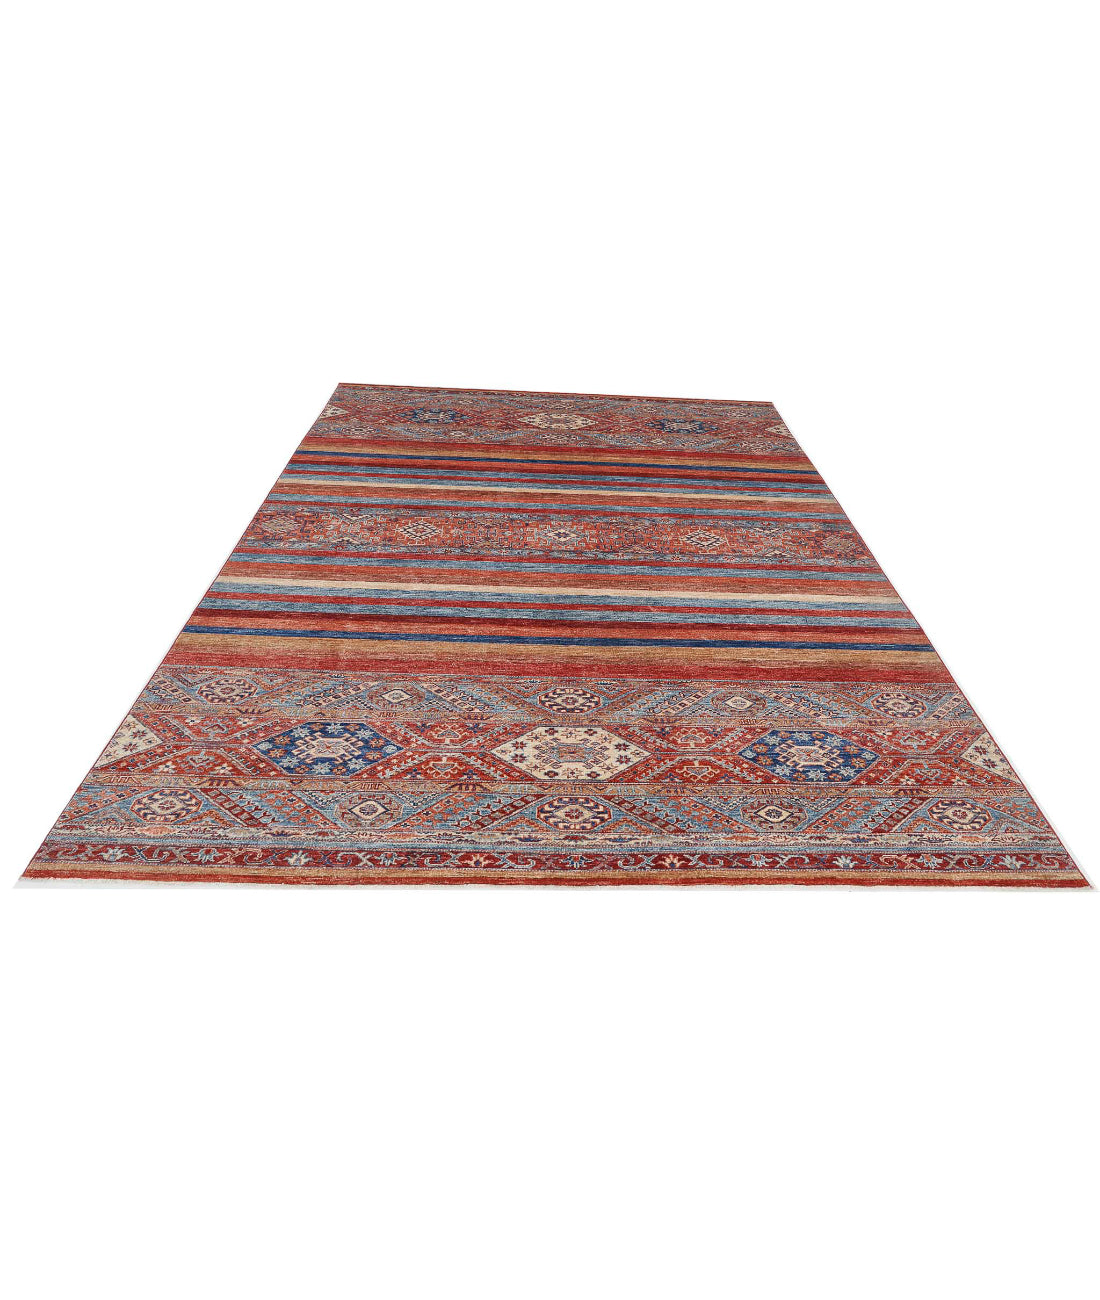 Hand Knotted Khurjeen Wool Rug - 6'9'' x 9'11'' 6'9'' x 9'11'' (203 X 298) / Multi / Multi